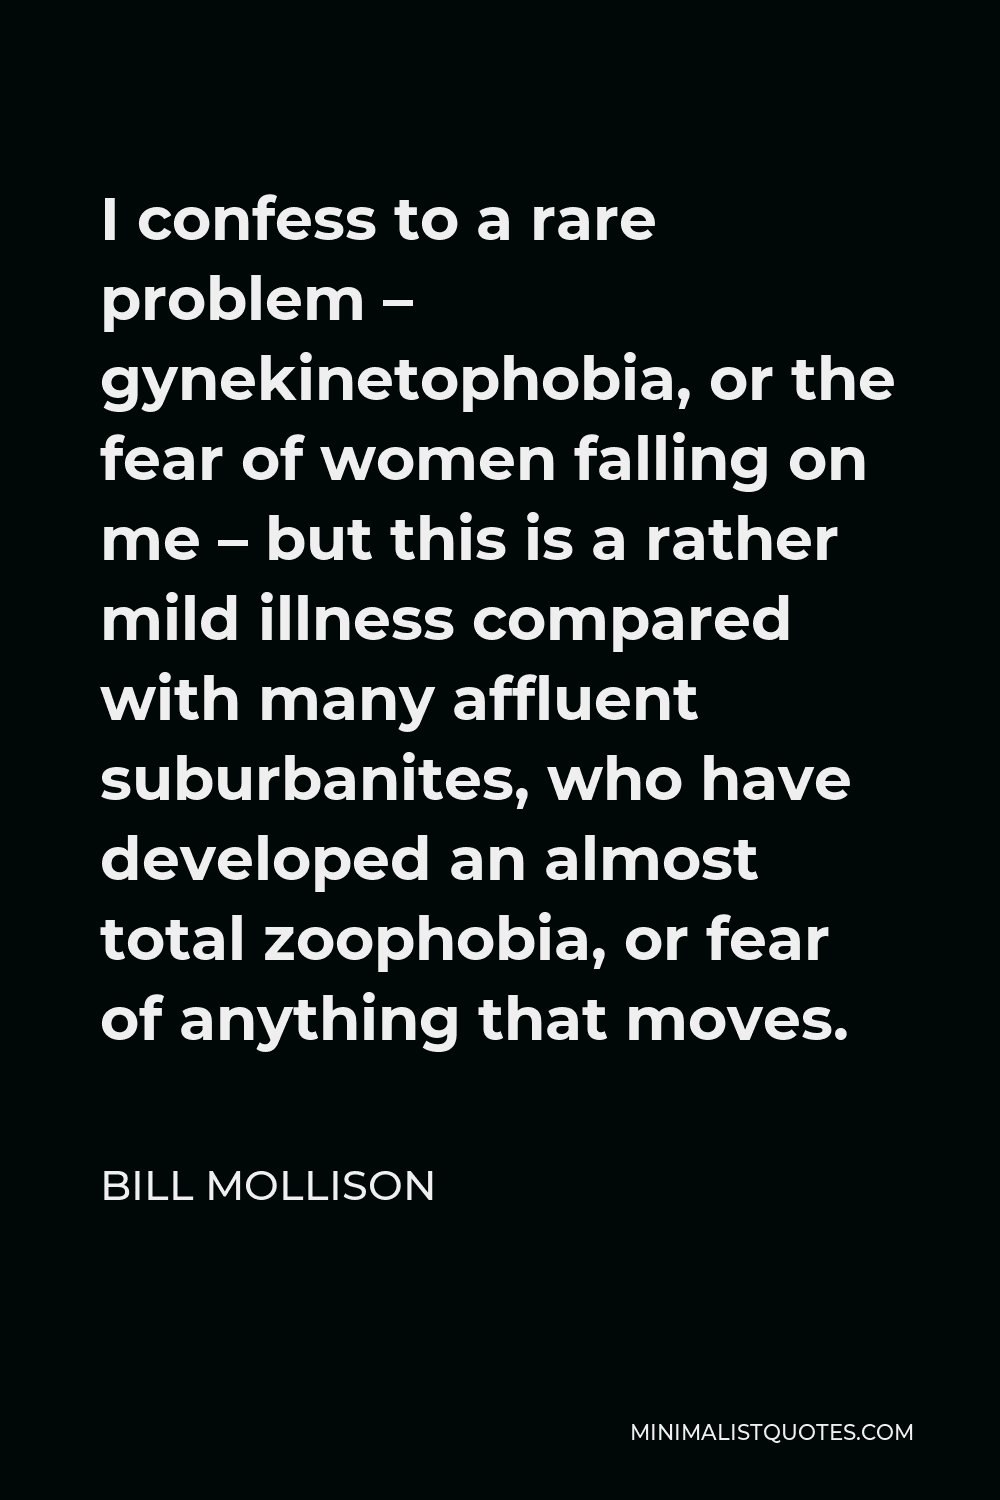 Bill Mollison Quote - I confess to a rare problem – gynekinetophobia, or the fear of women falling on me – but this is a rather mild illness compared with many affluent suburbanites, who have developed an almost total zoophobia, or fear of anything that moves.